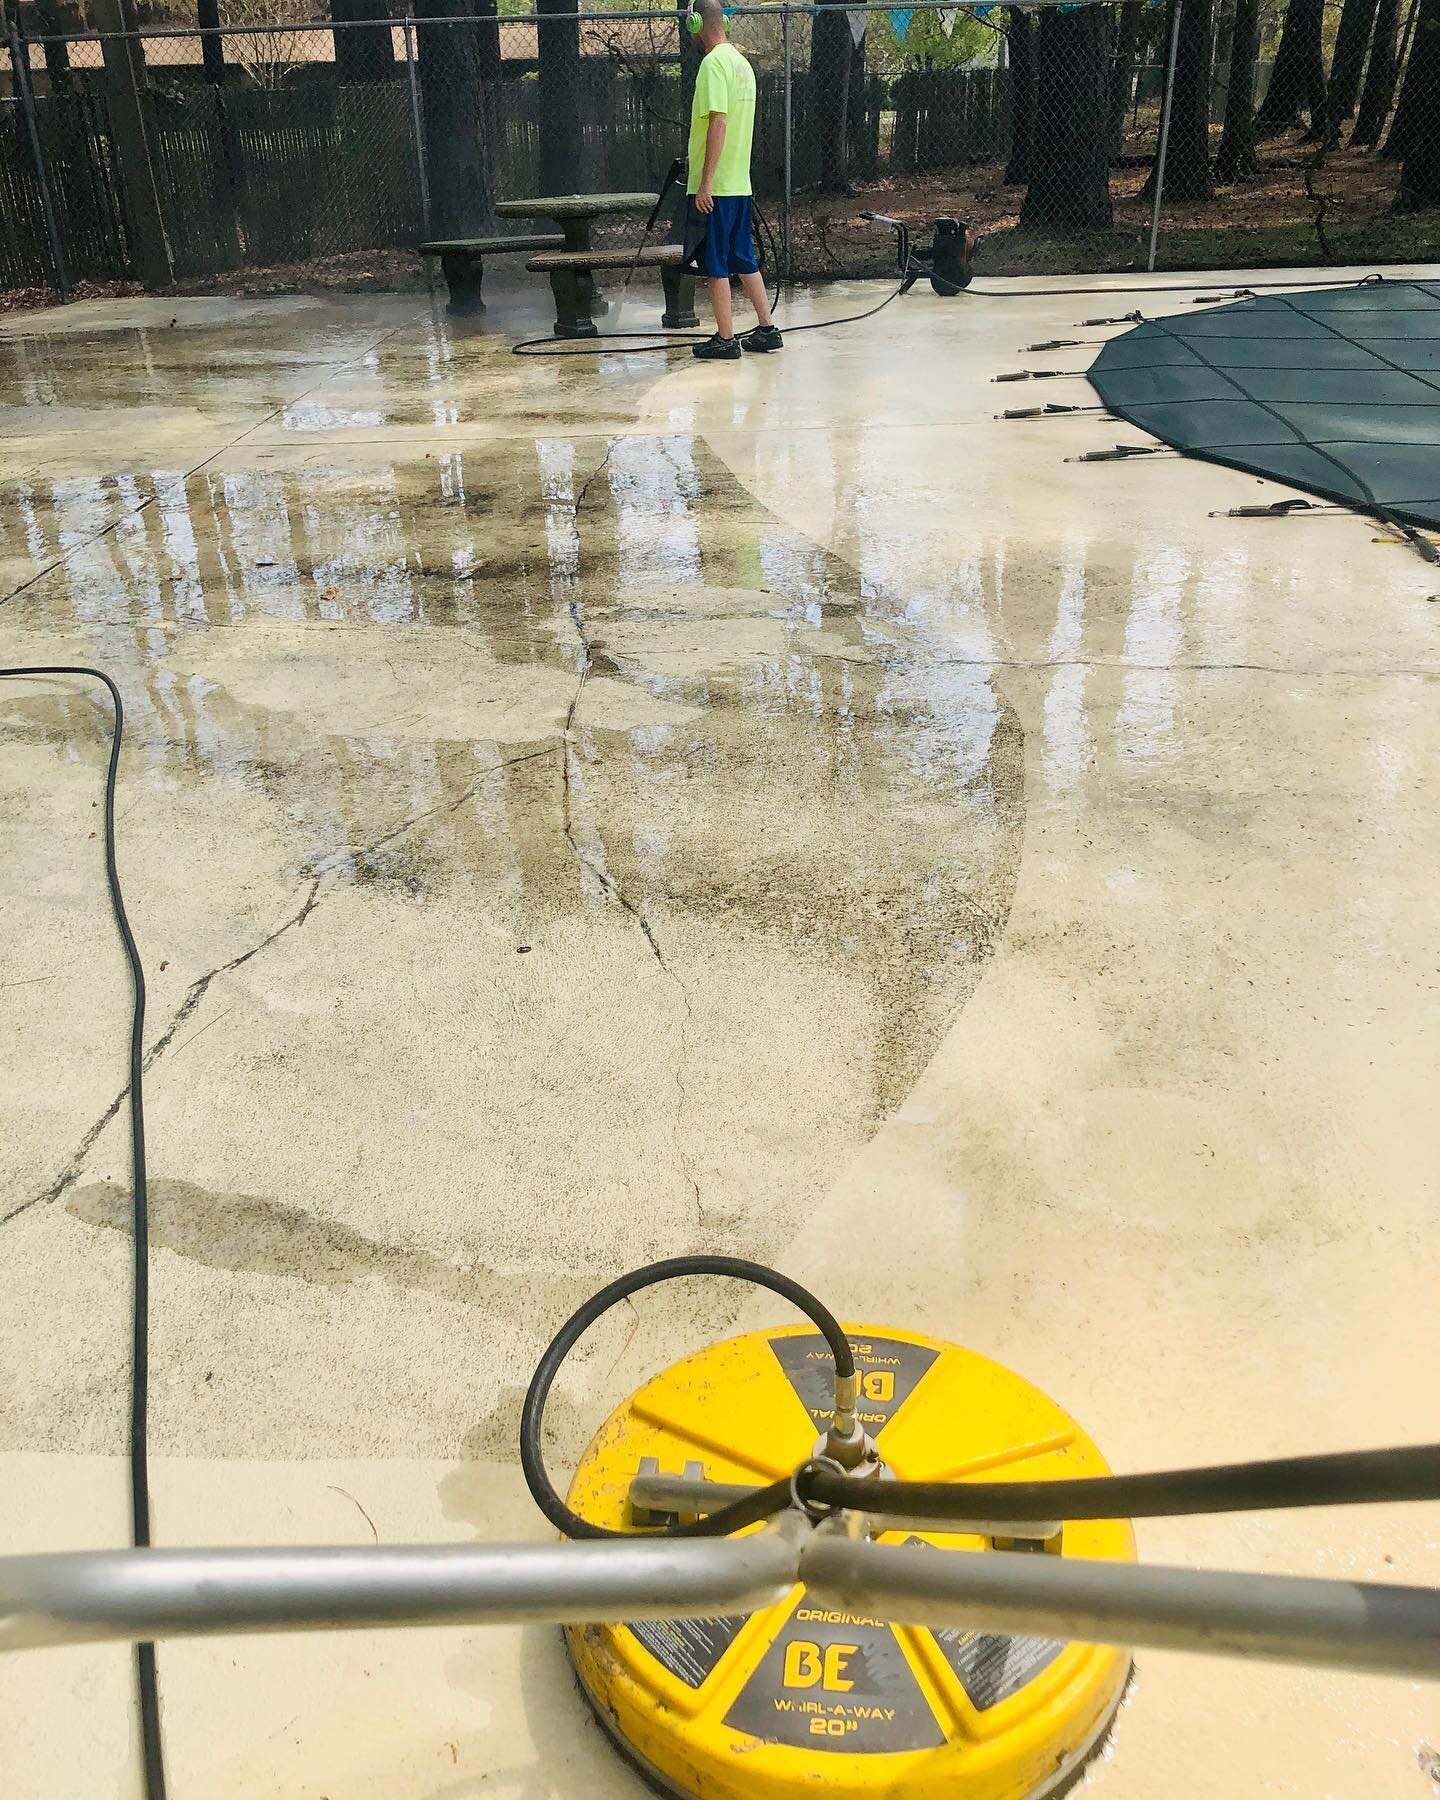 The temperatures are warming up so we out here getting dirty for our customers. Let us get you summer ready! #ezdoesitlawncare #wepressurewashtoo @imperfectangel_83